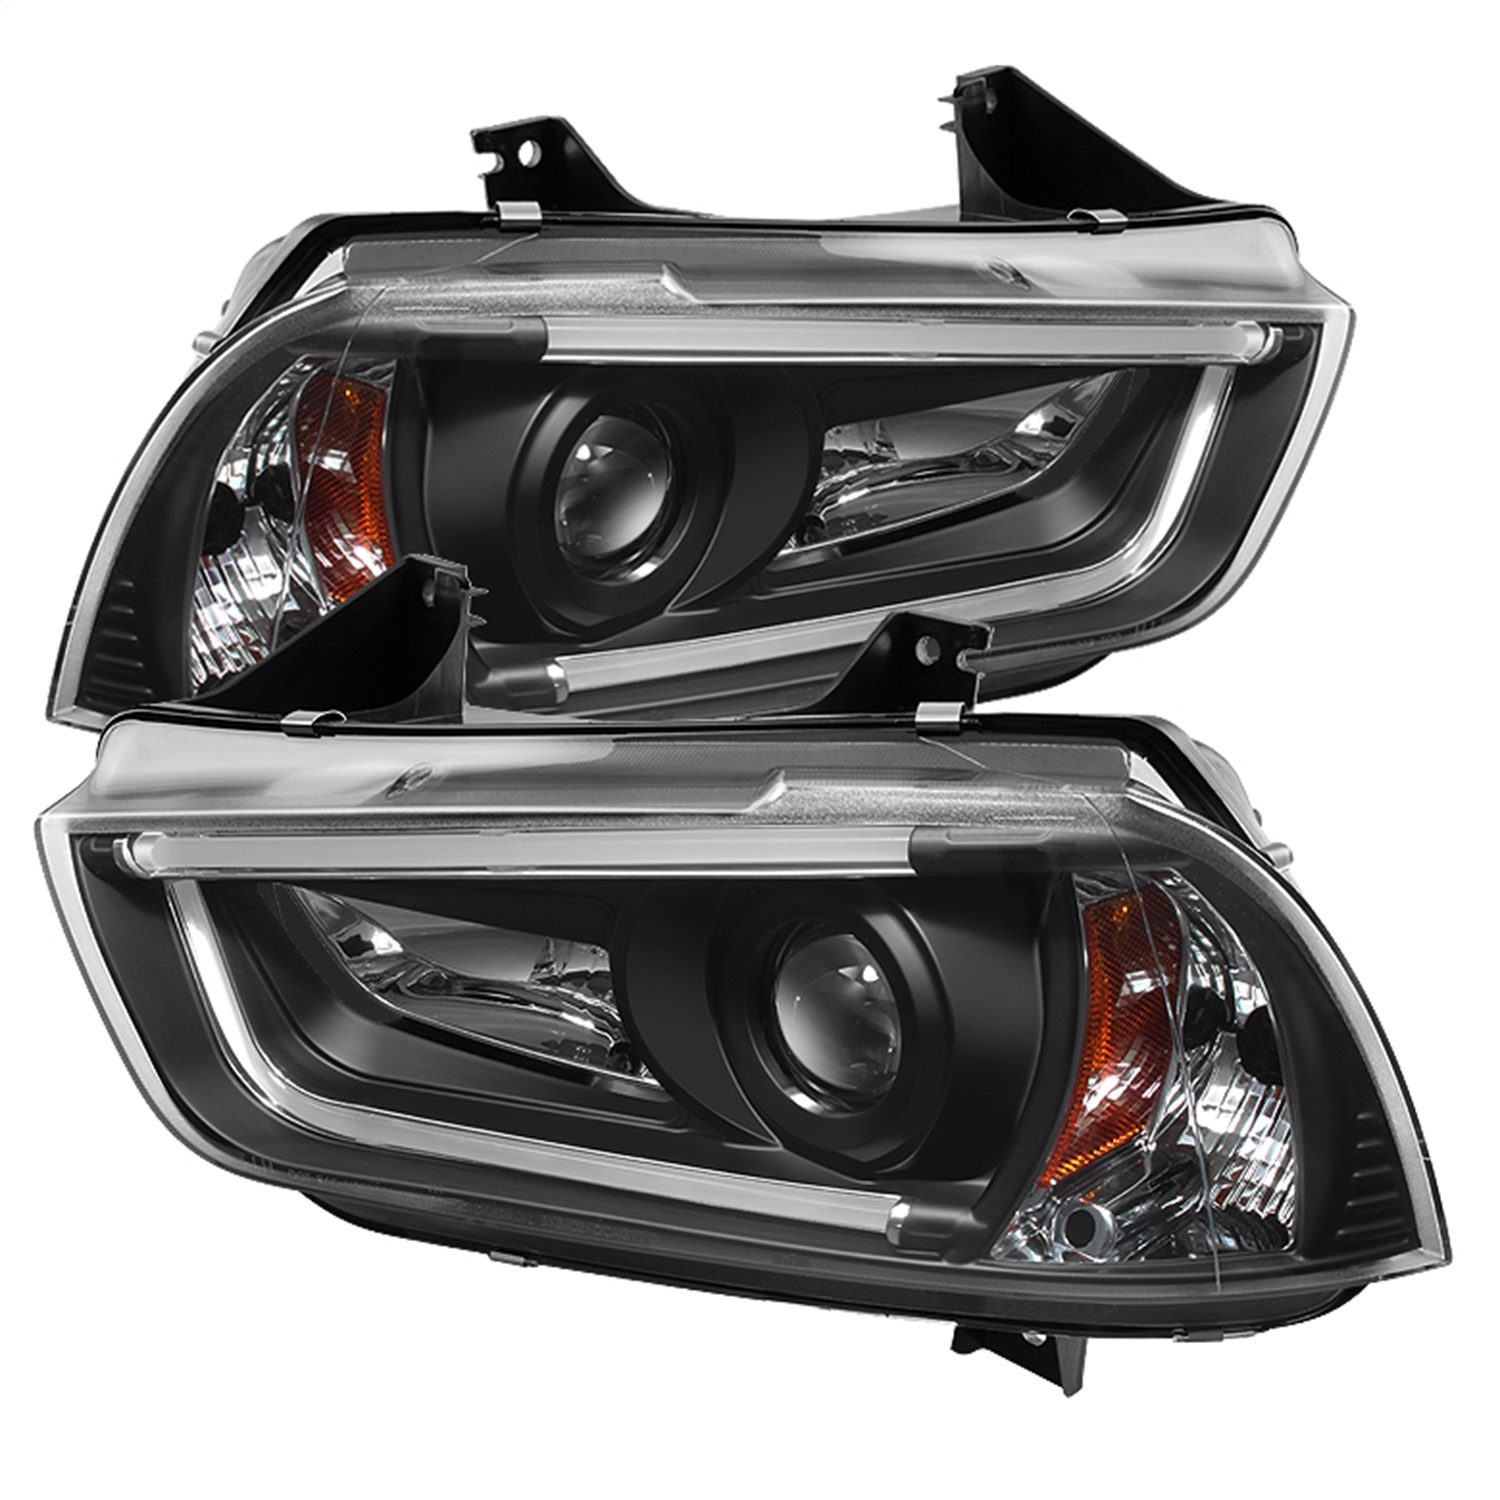 Spyder Auto 5074188 DRL Projector Headlights Fits 11-14 Charger